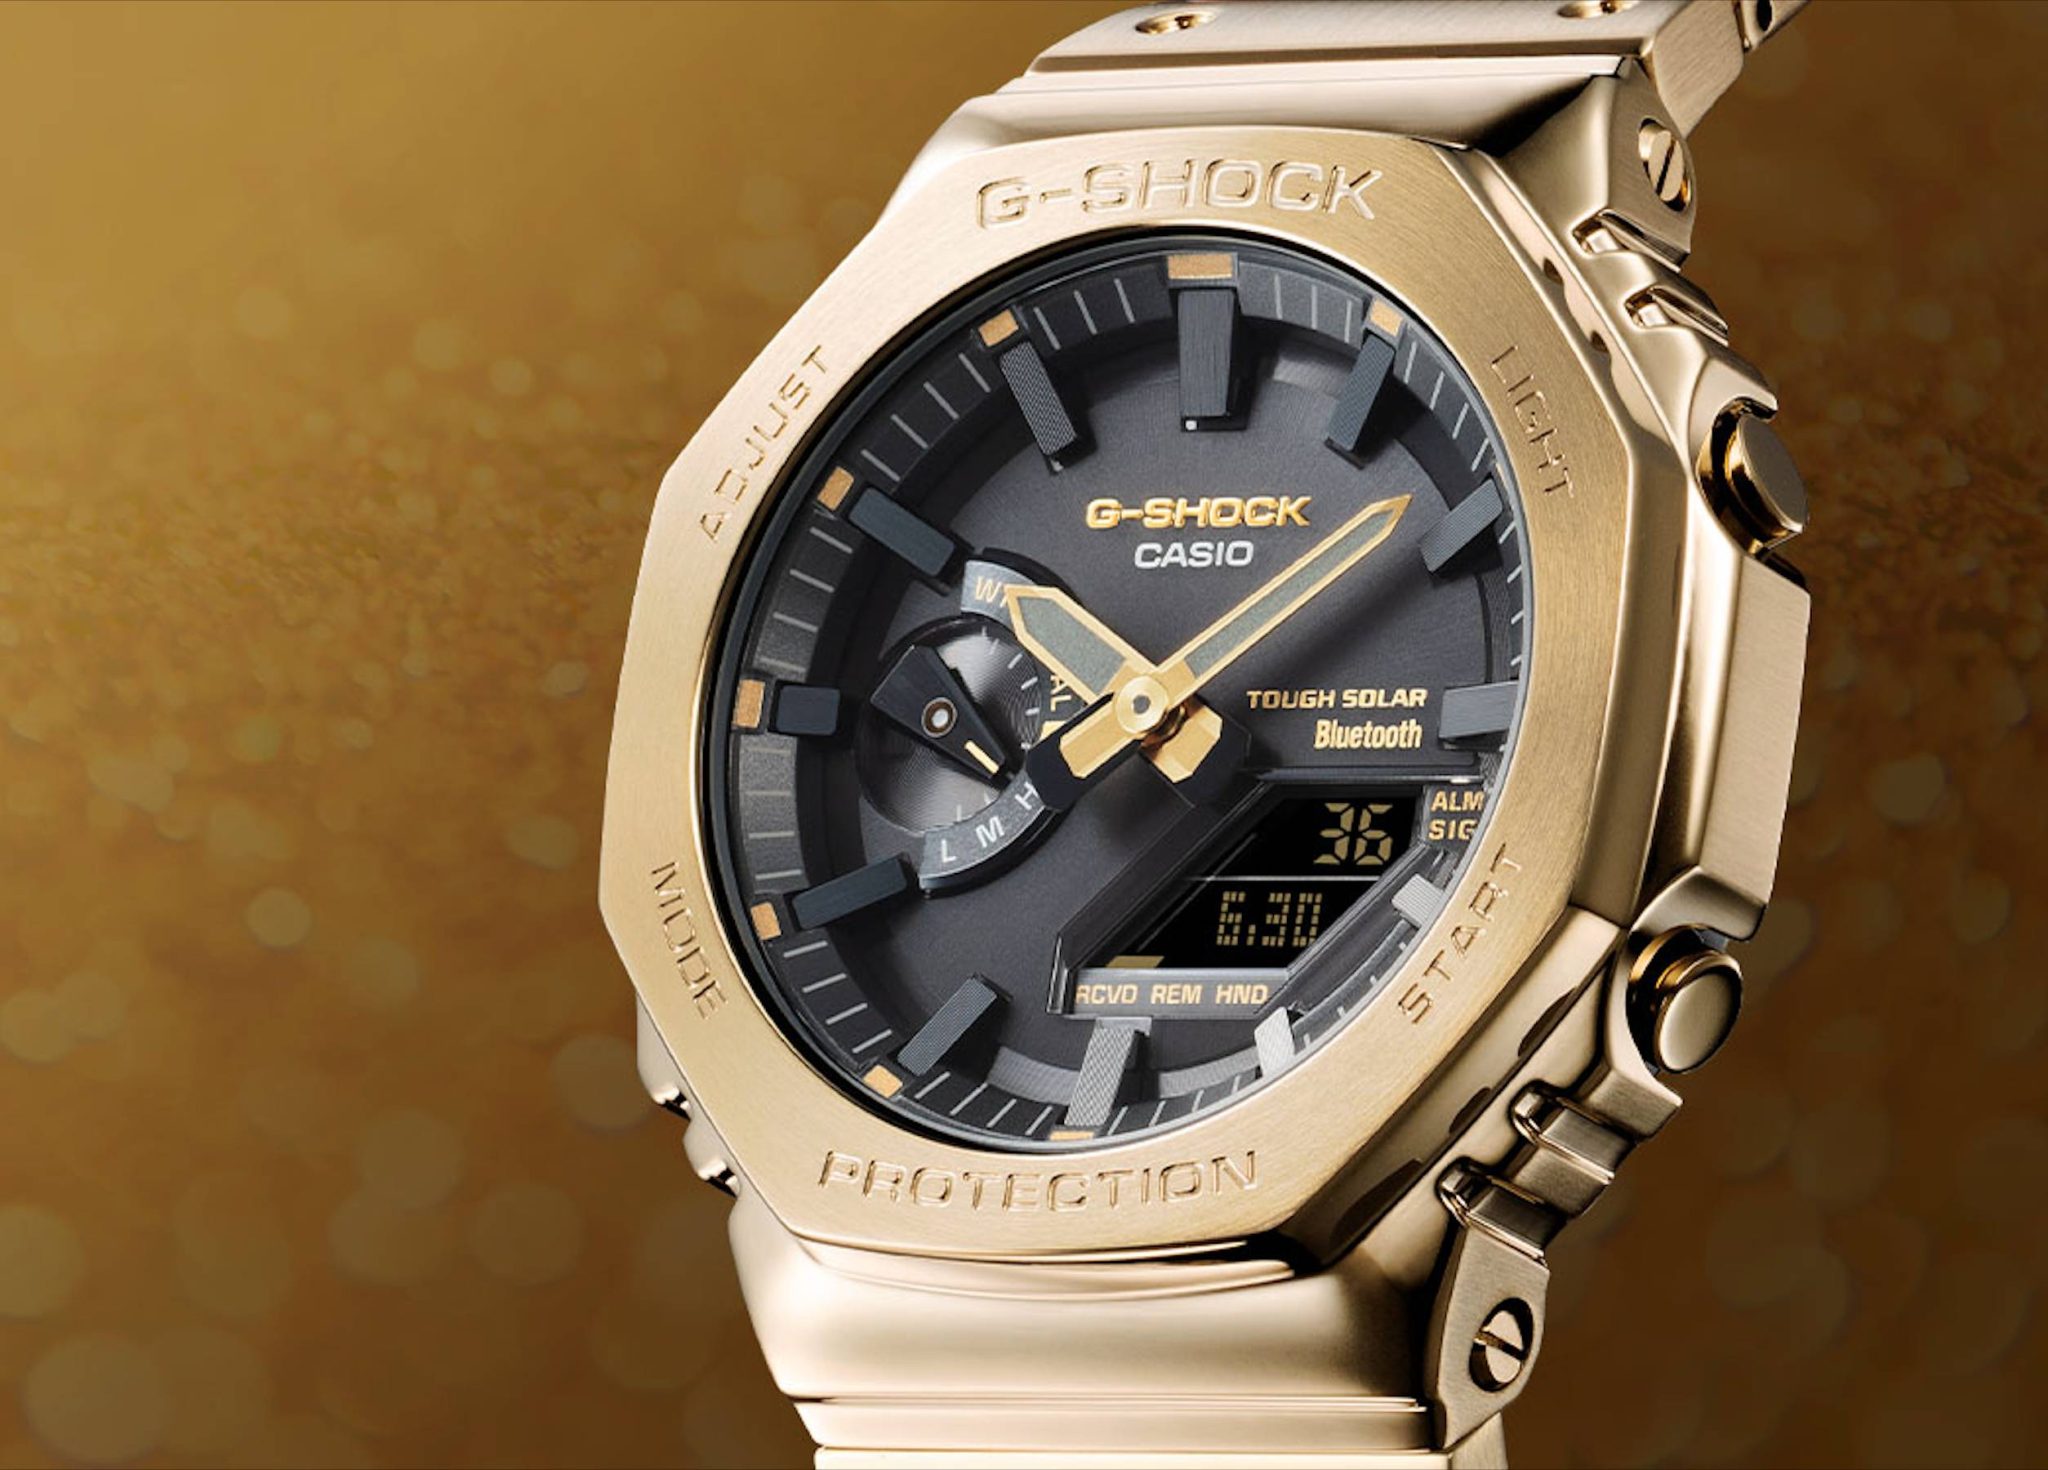 CASIO RELEASES NEW FULL-METAL G-SHOCK IN SHINY GOLDEN YELLOW HUE Netherlands